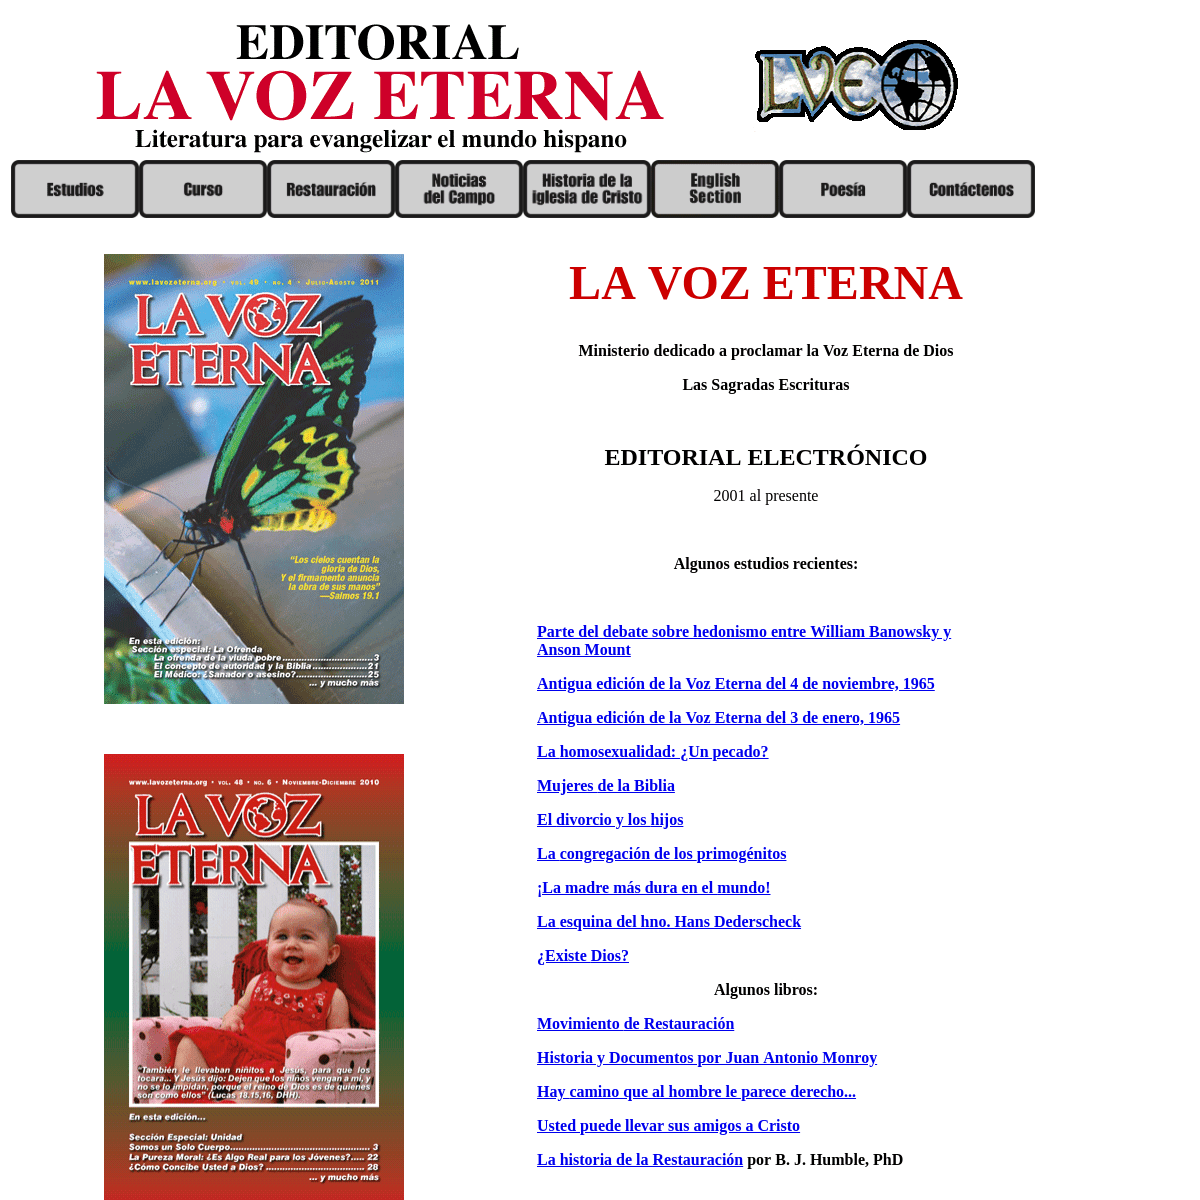 A complete backup of lavozeterna.org